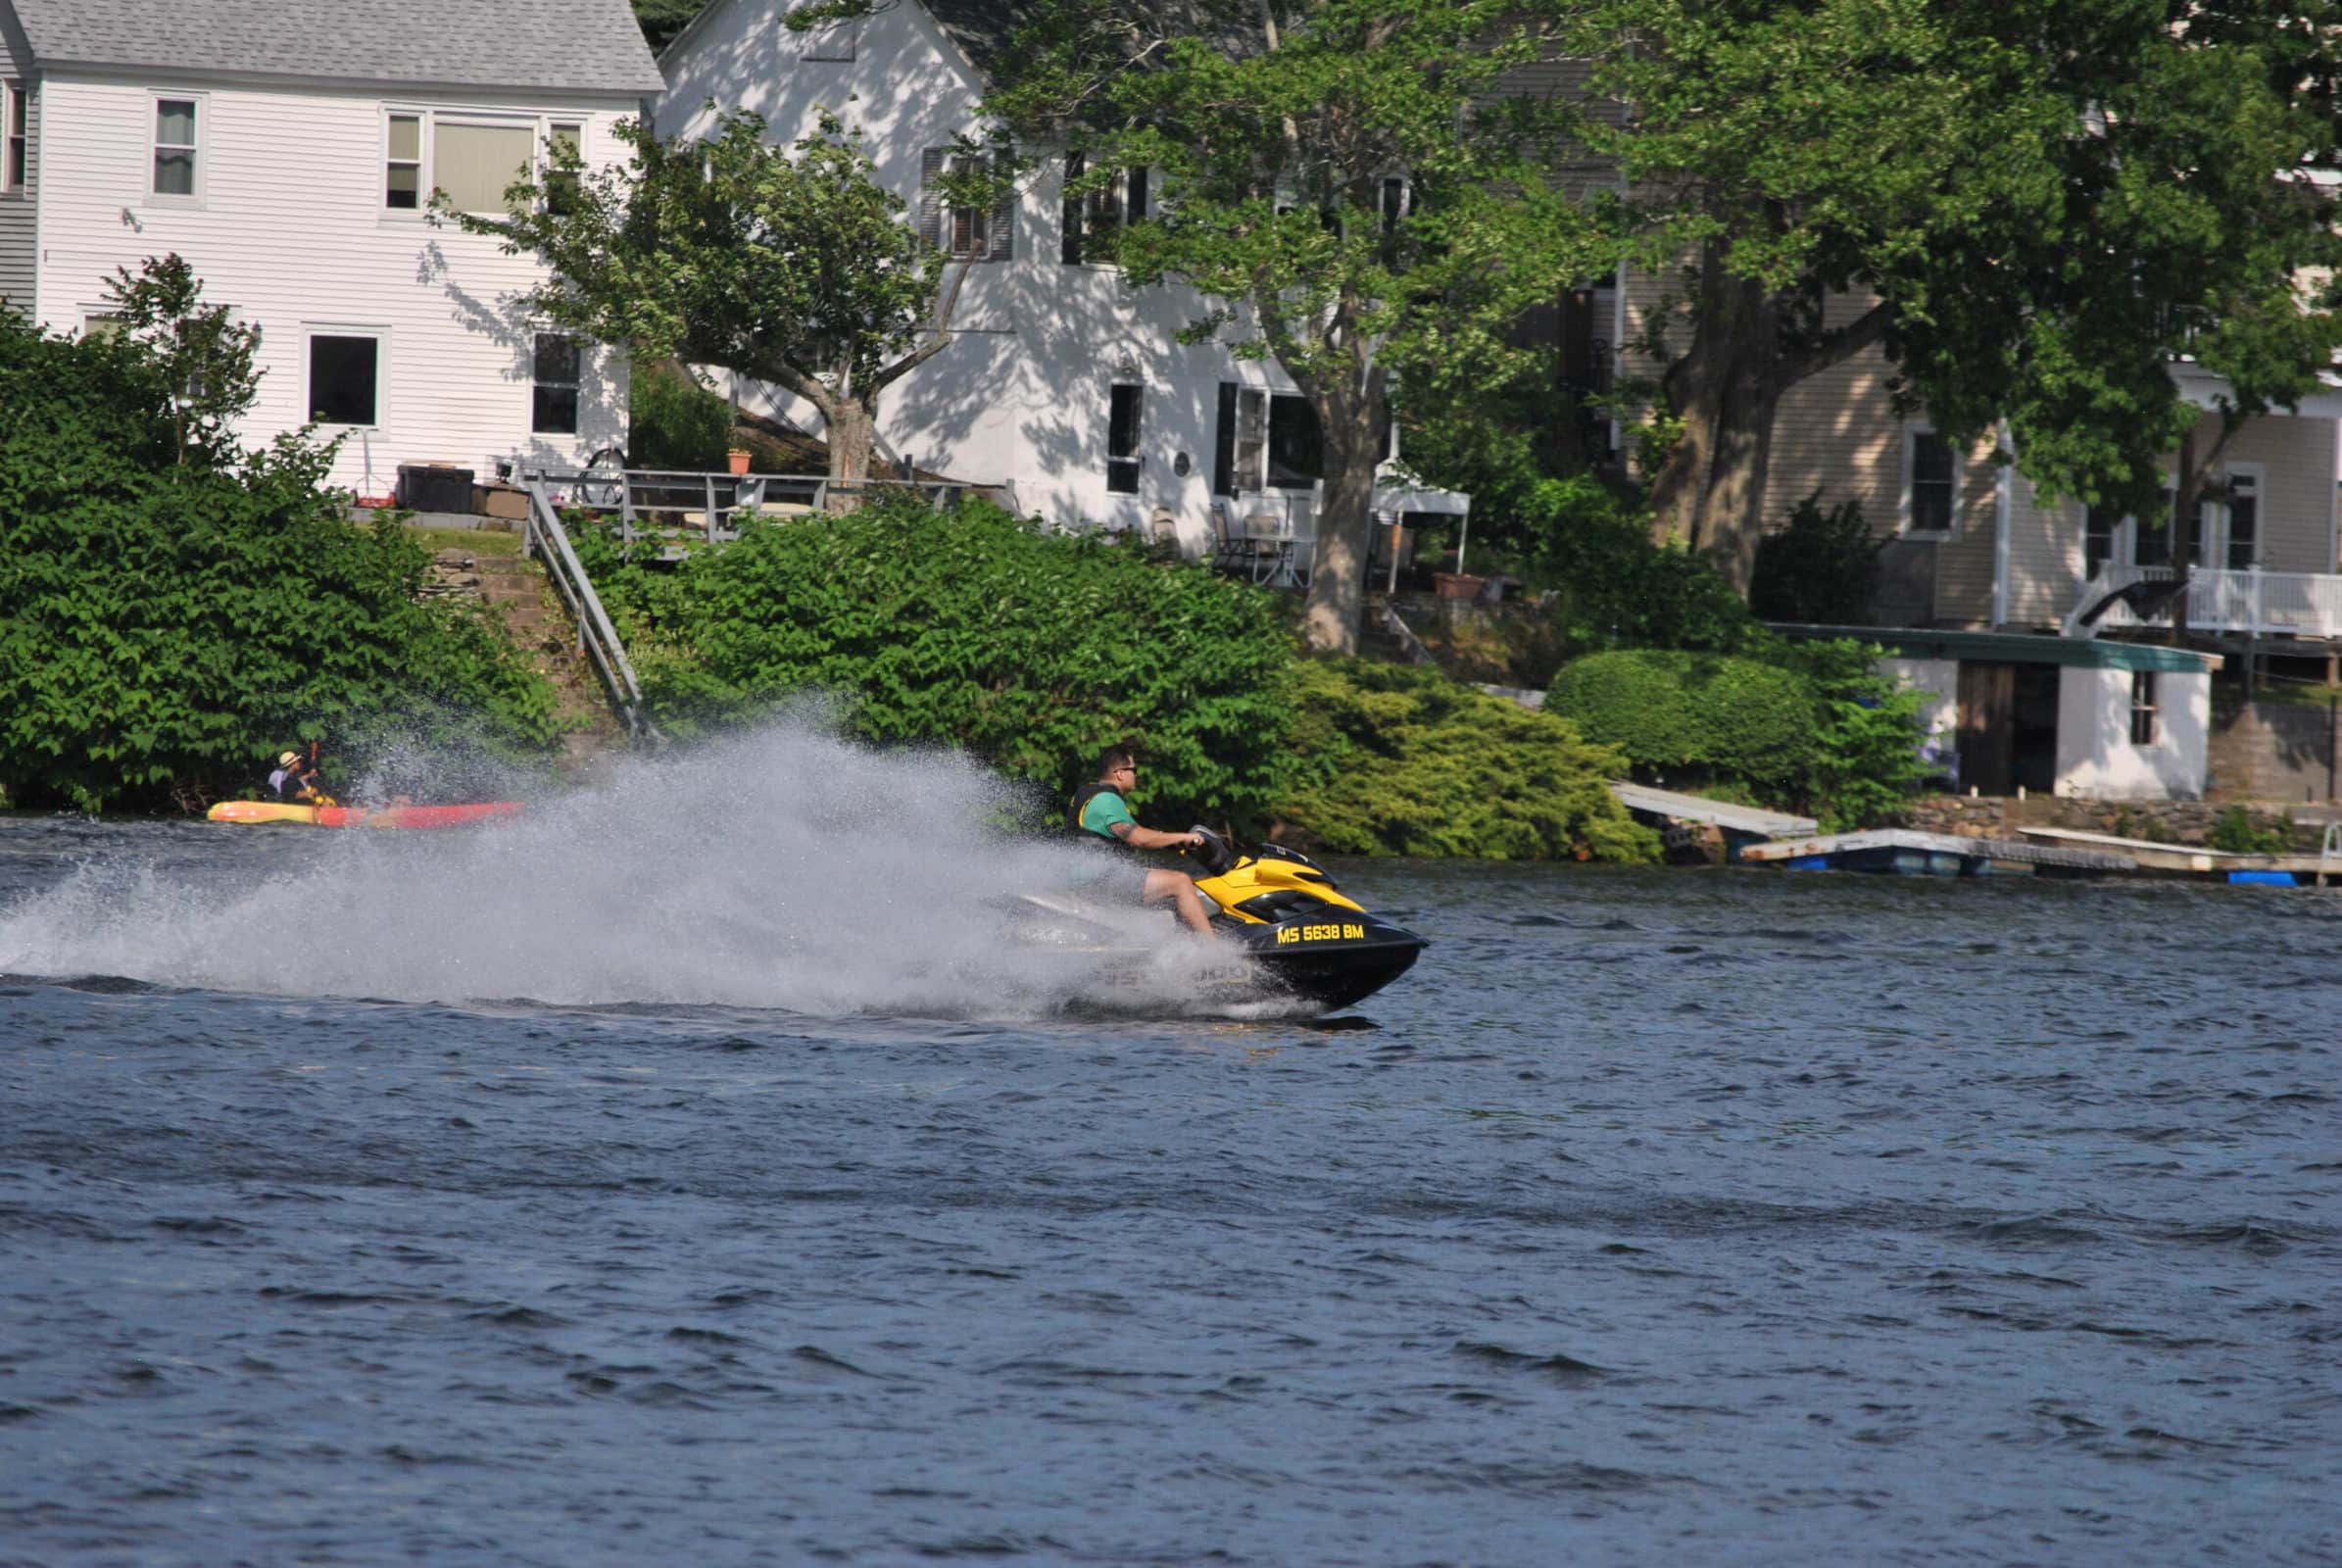 New task force focuses on Lake Quinsigamond safety